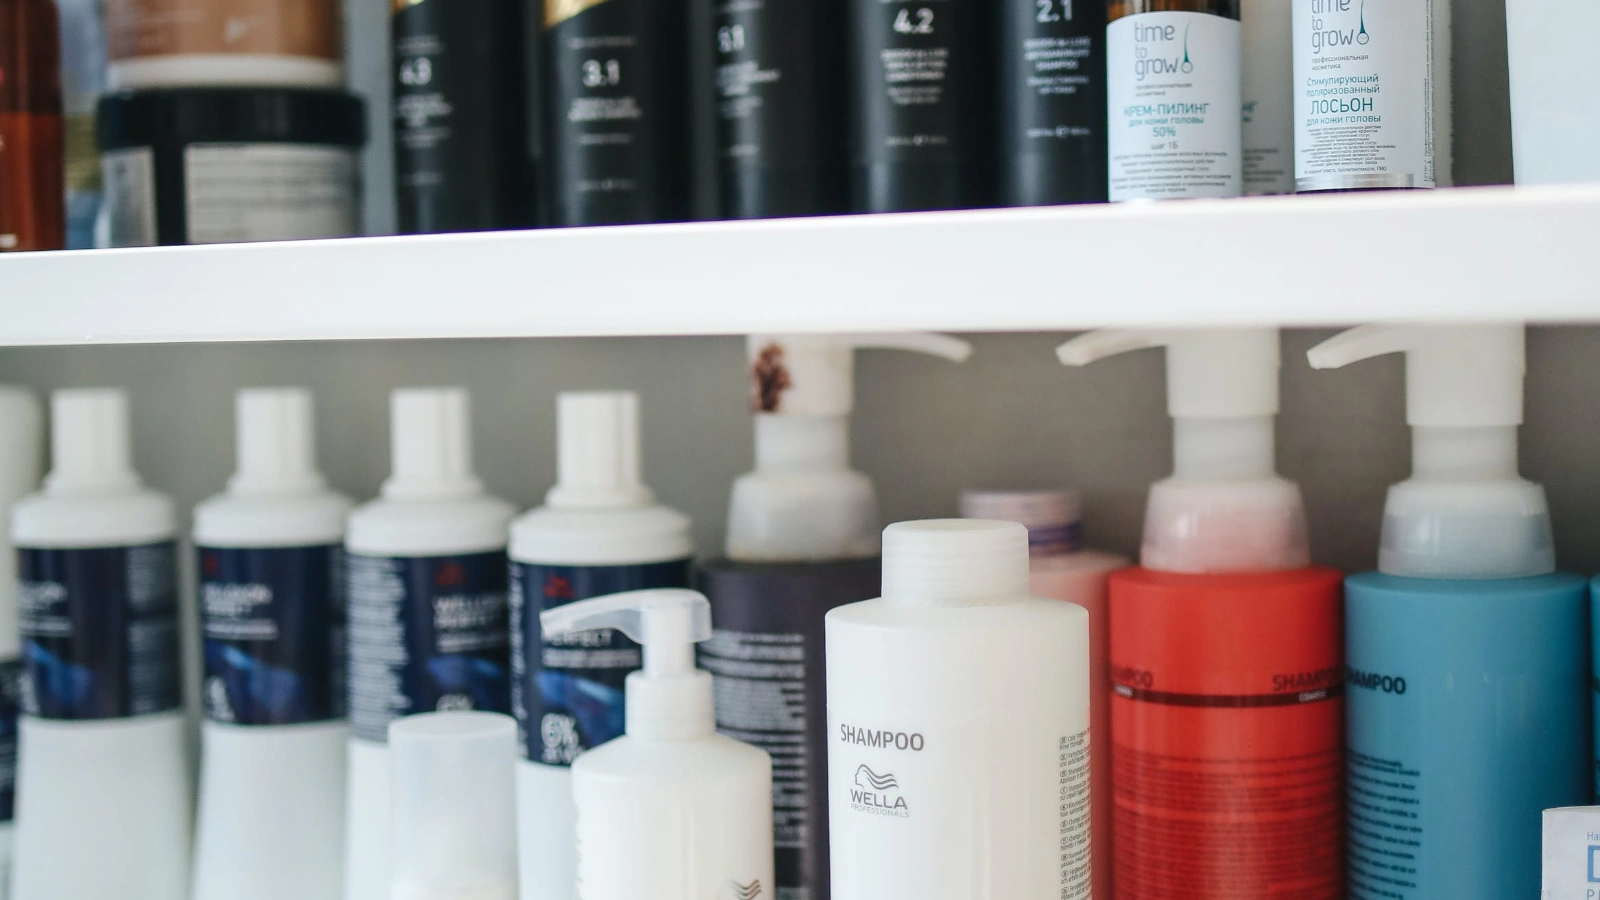 Use a gentle shampoo that's right for you